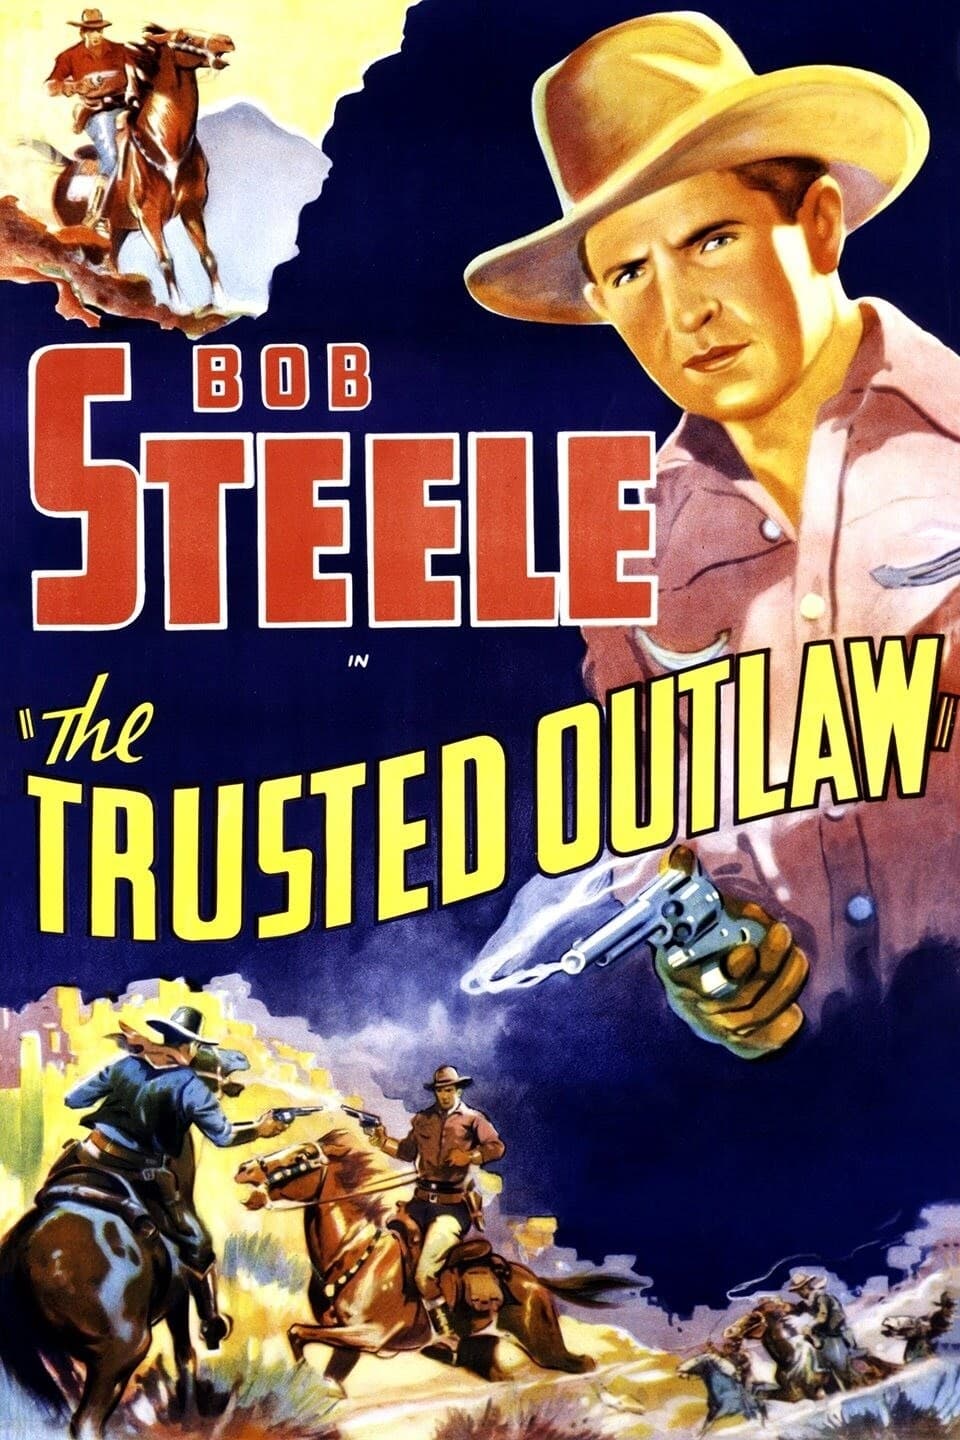 The Trusted Outlaw